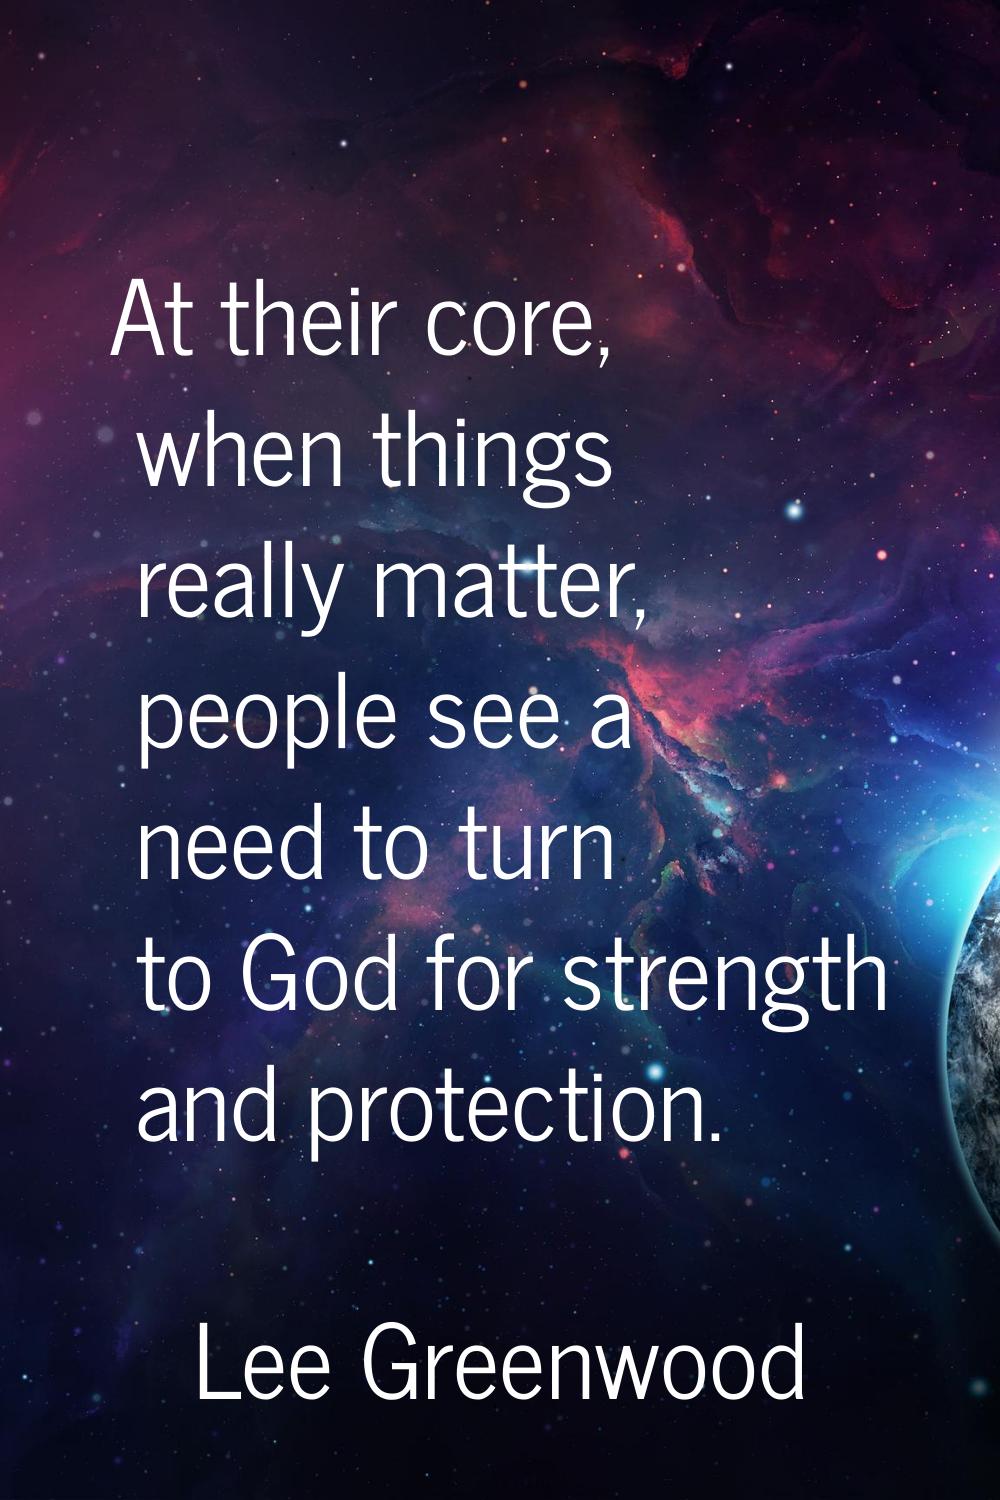 At their core, when things really matter, people see a need to turn to God for strength and protect